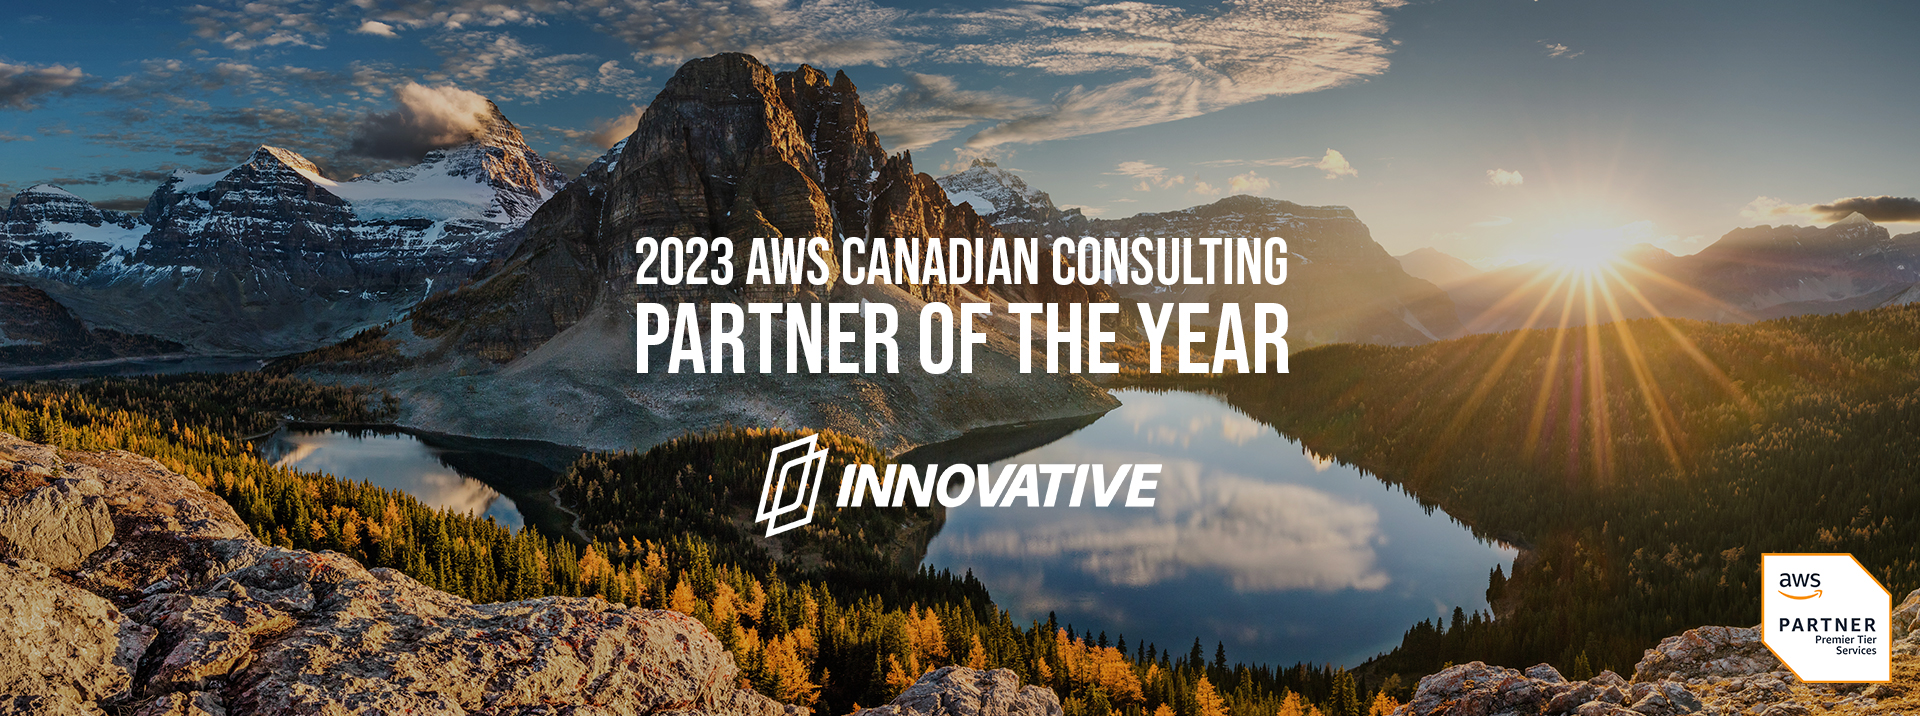 2023 AWS Canadian Consulting Partner of the Year